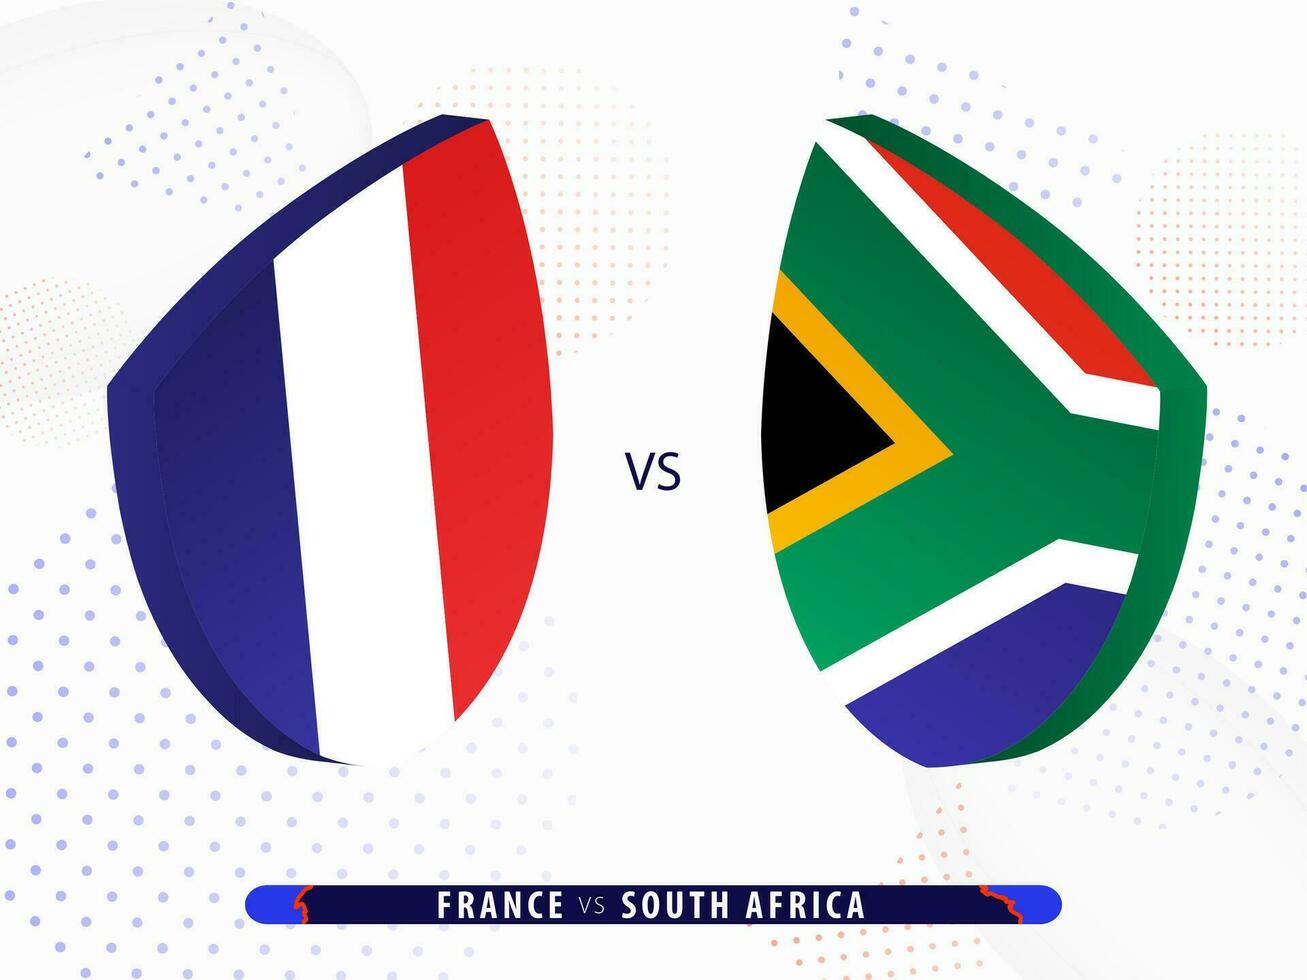 France vs South Africa quarter-final rugby match, international rugby competition 2023. vector